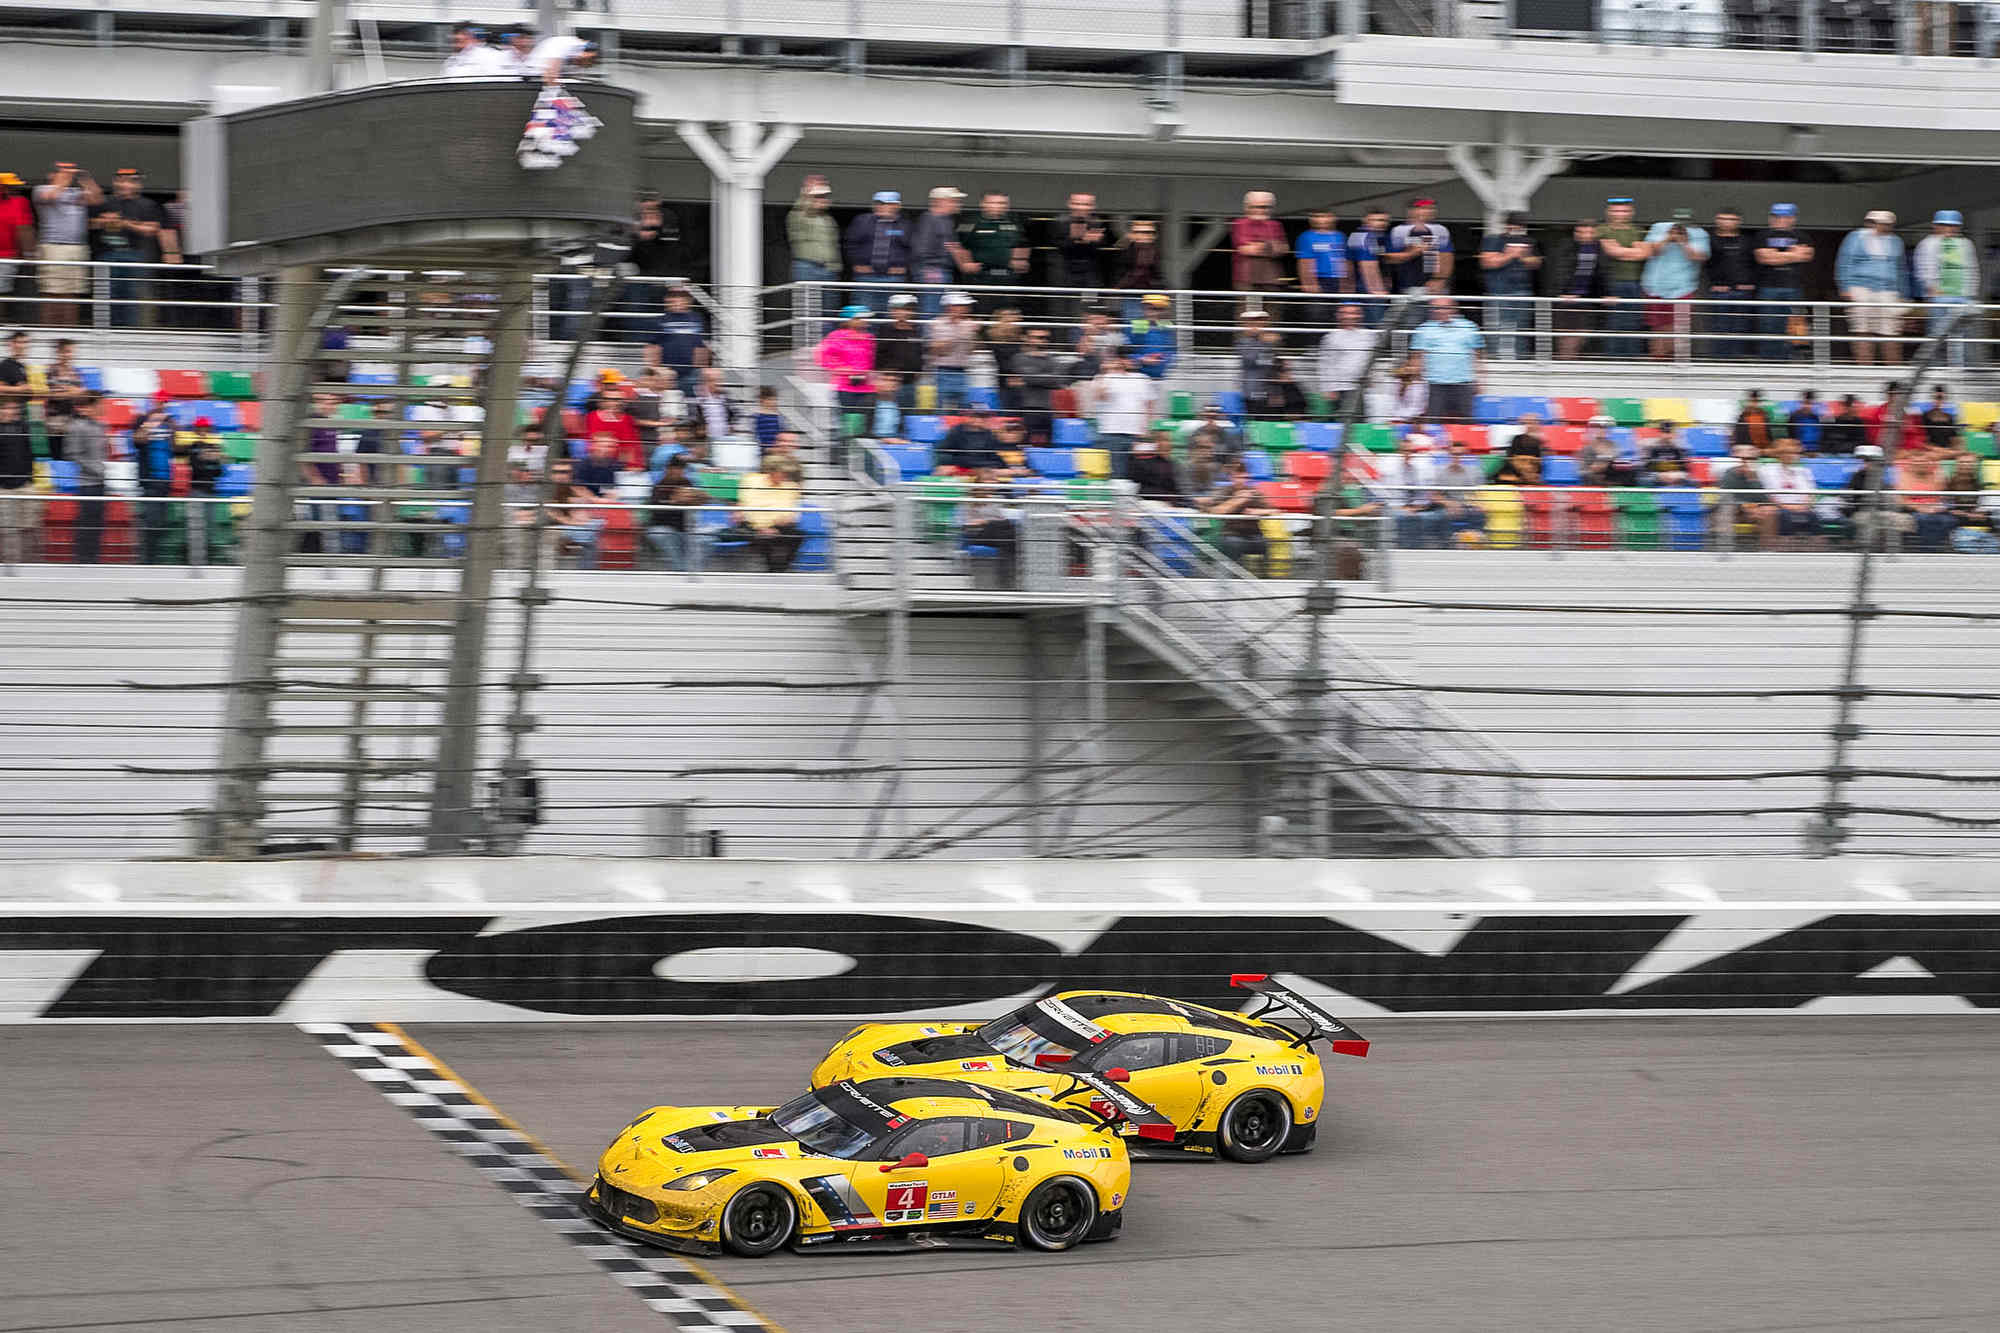 The Rolex 24 GTLM winning Corvettes are going to LeMans